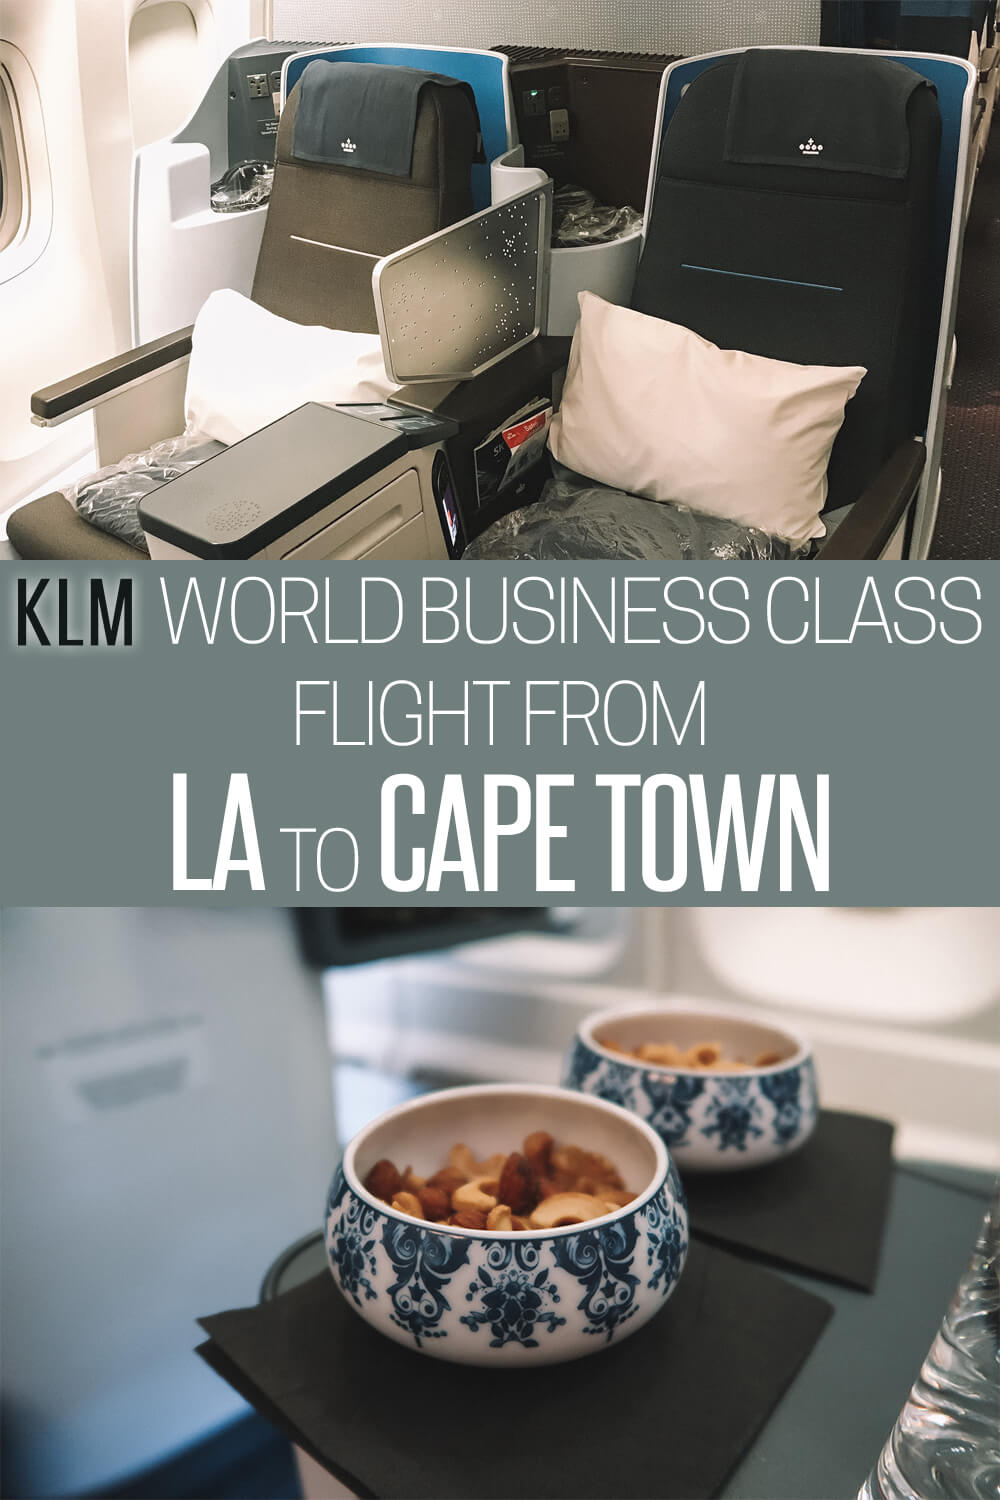 KLM World Business Class Flight from LA to Cape Town